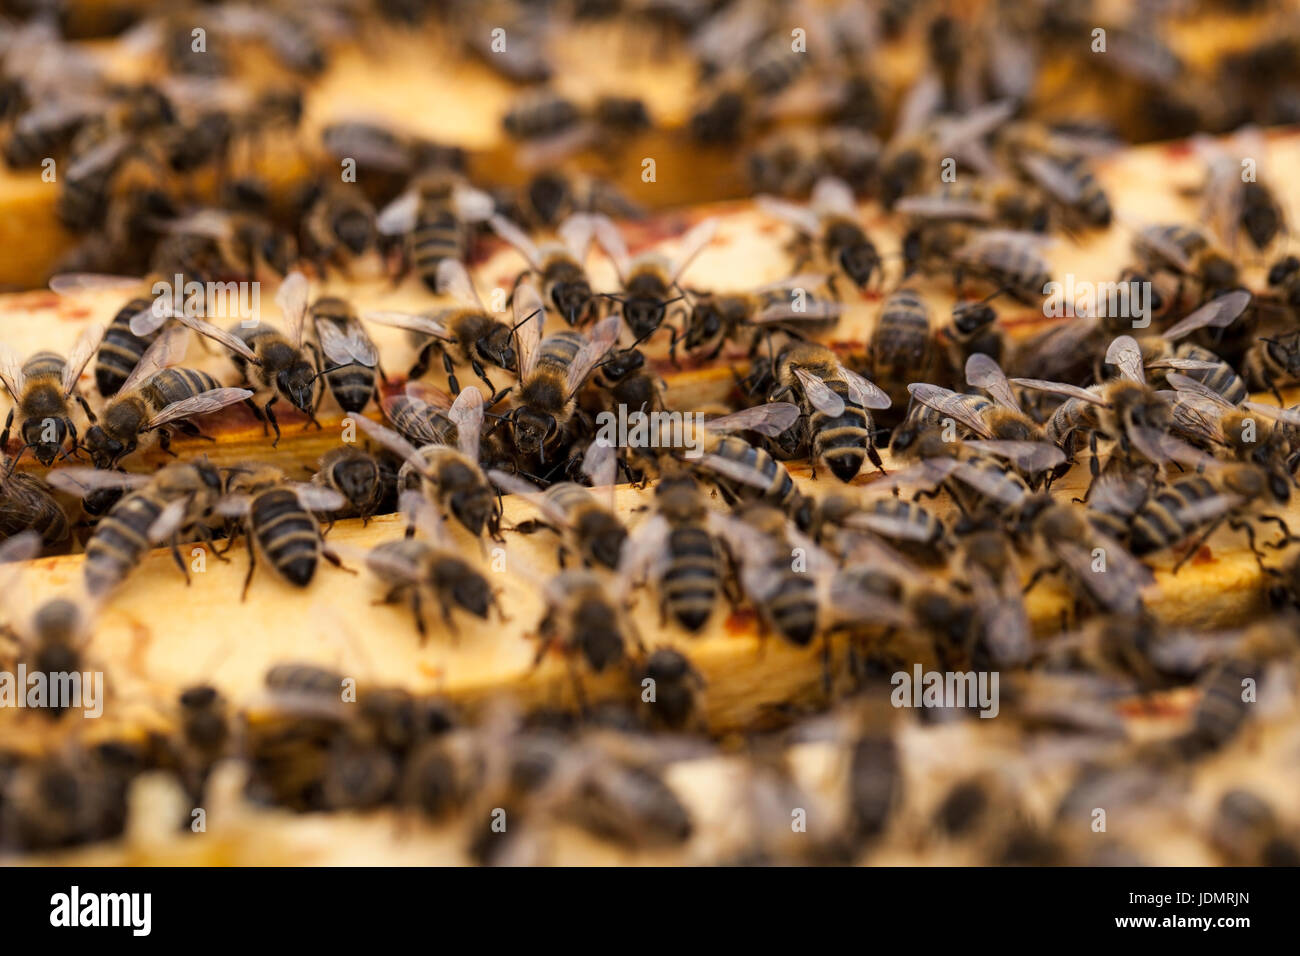 Working bees on a honeycomb Stock Photo